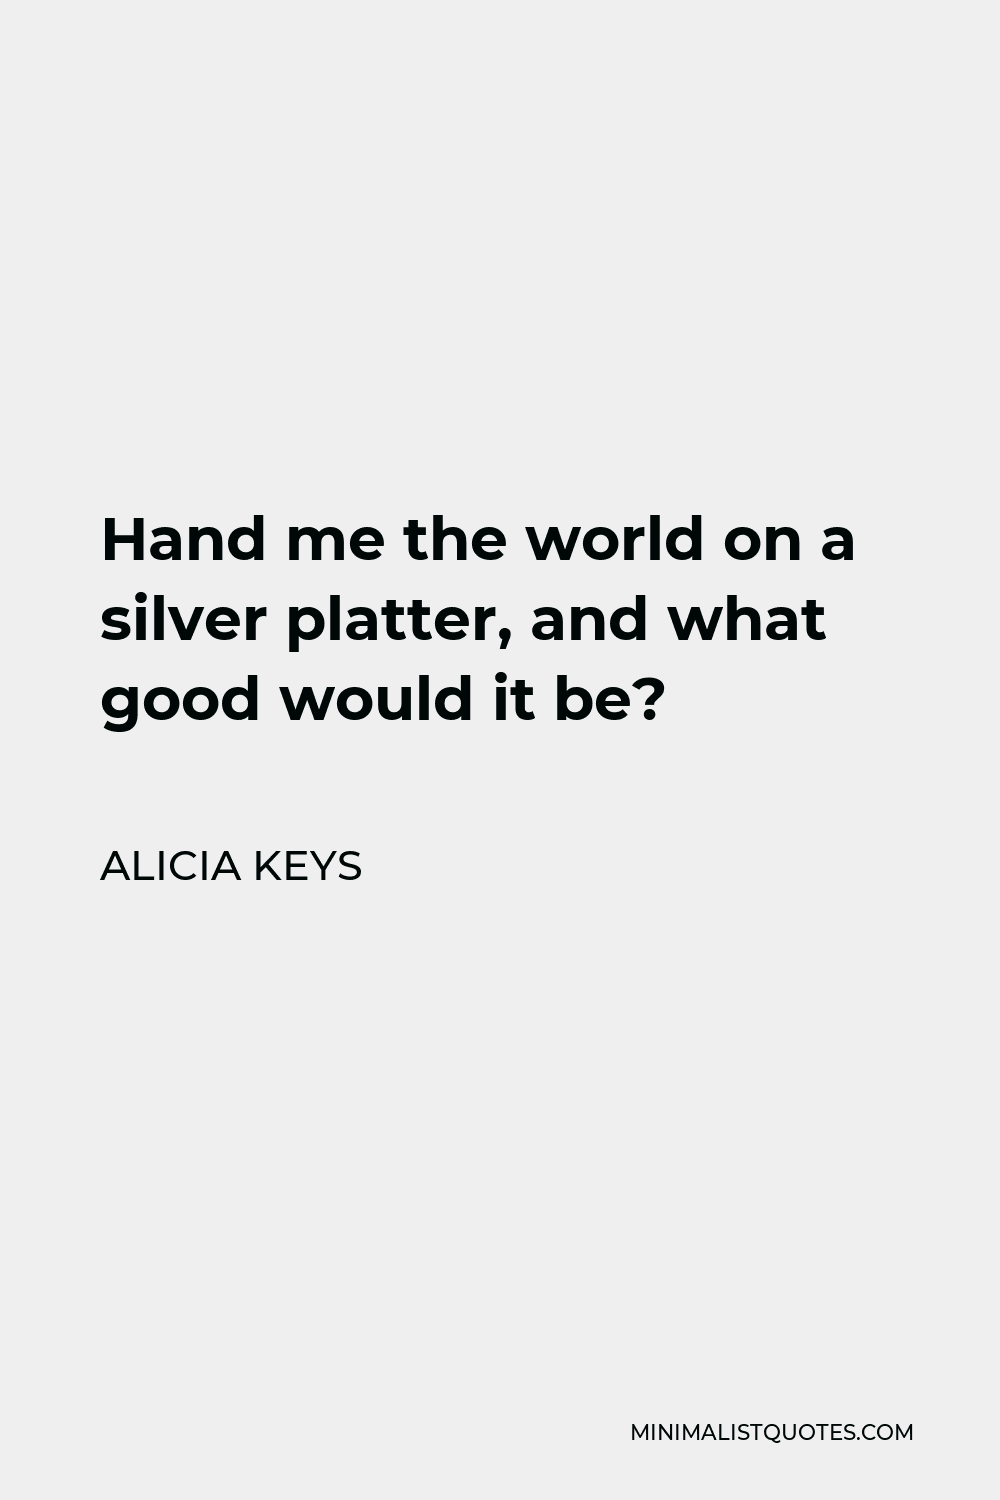 Alicia Keys Quote - Hand me the world on a silver platter, and what good would it be?